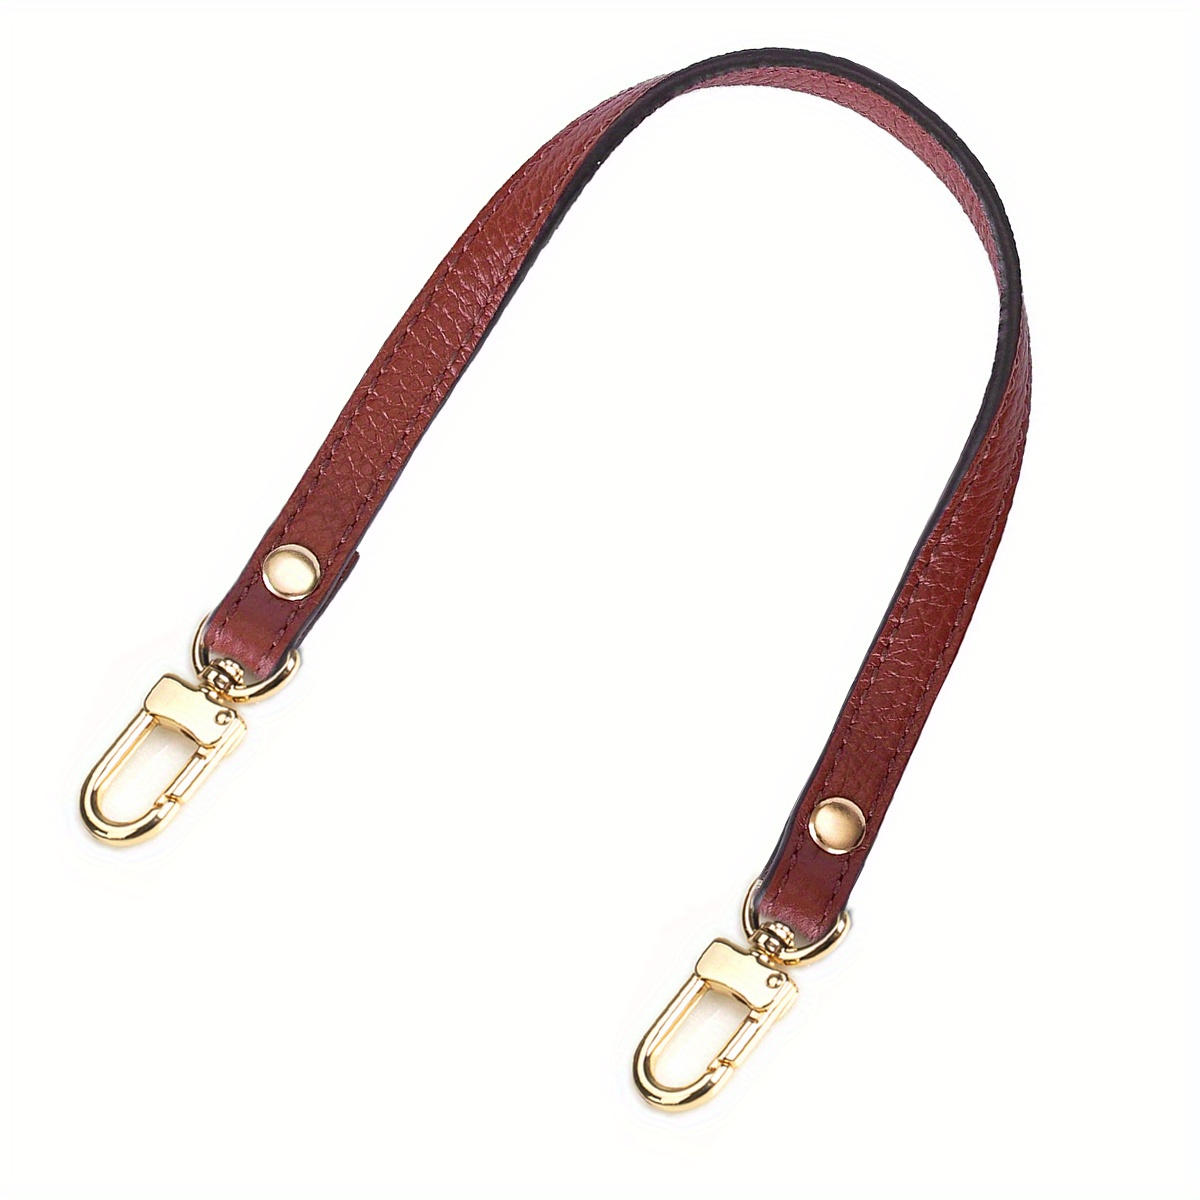 130CM Navy Crossbody Leather Shoulder Strap Replacement For Louis Vuitton  51.18